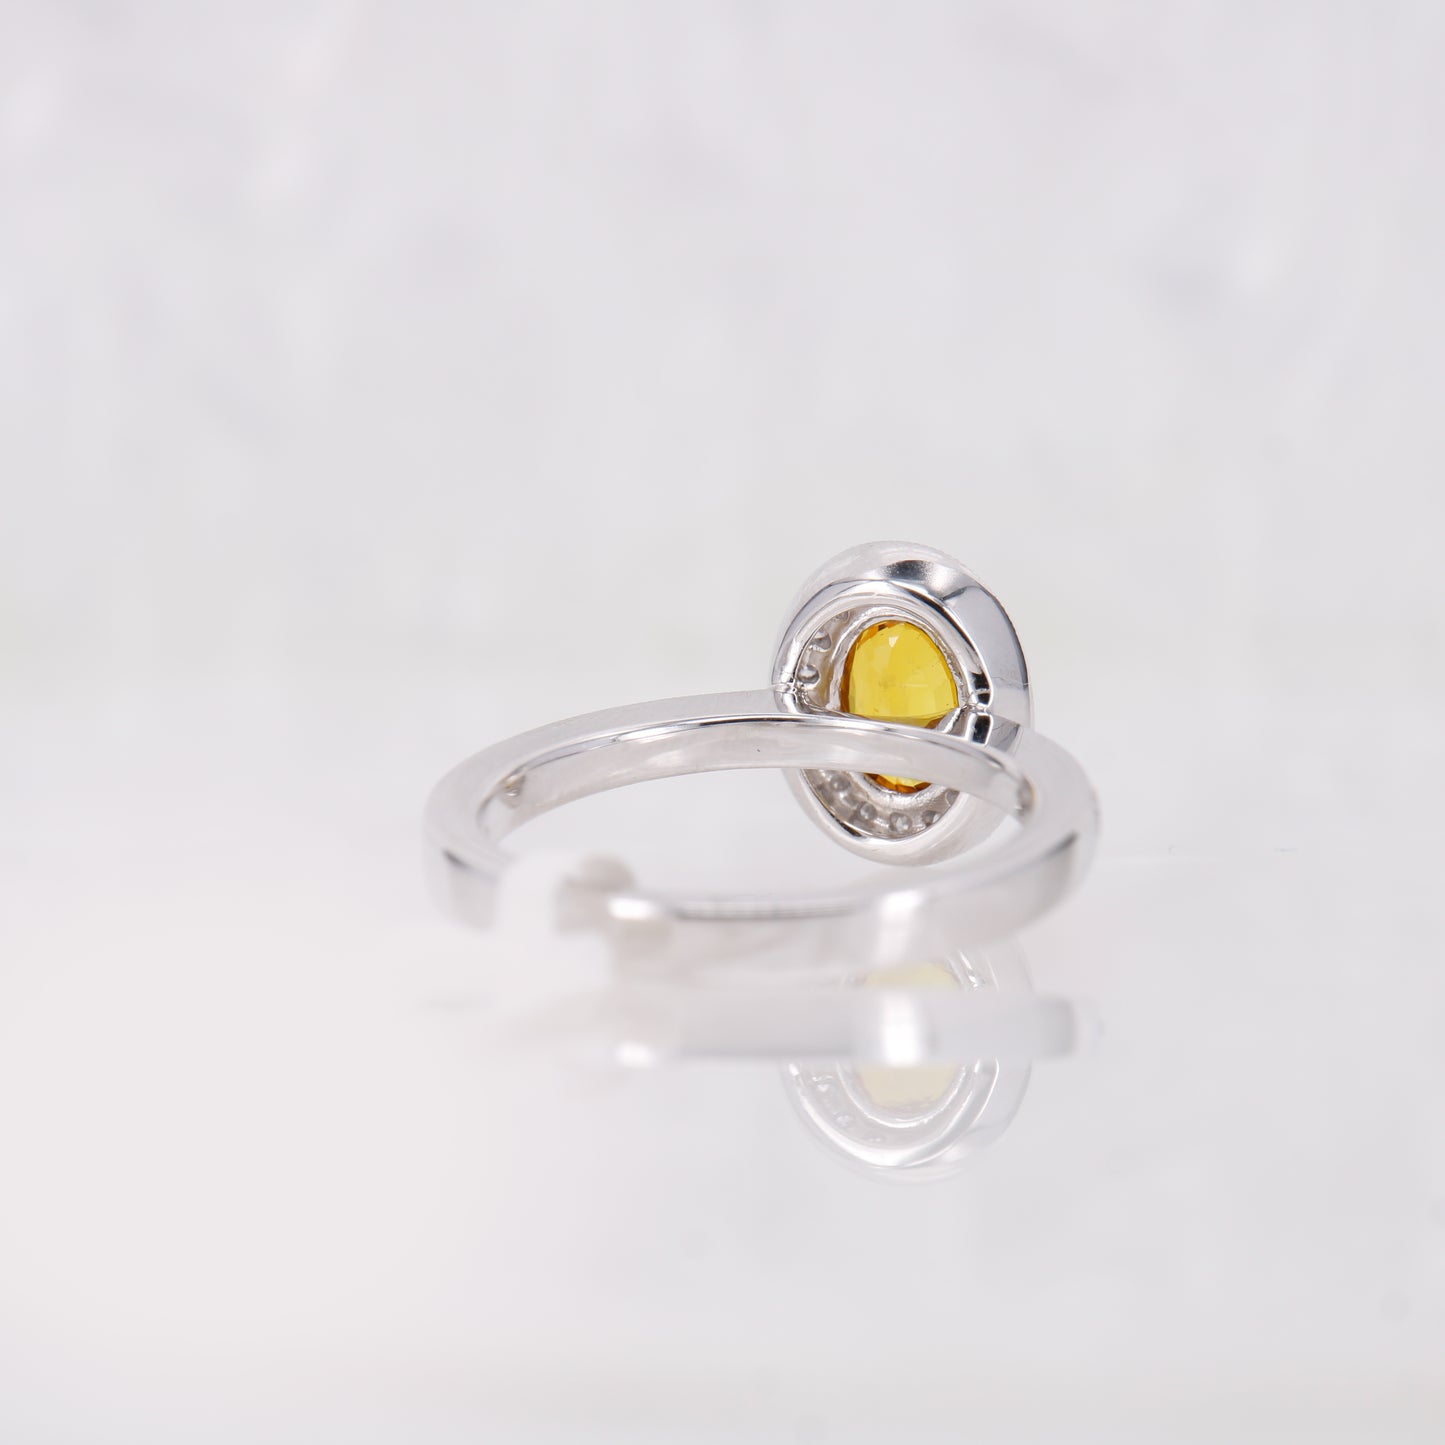 Yellow Sapphire oval engagement ring. Yellow orange sapphire surrounded by a halo of diamonds. 